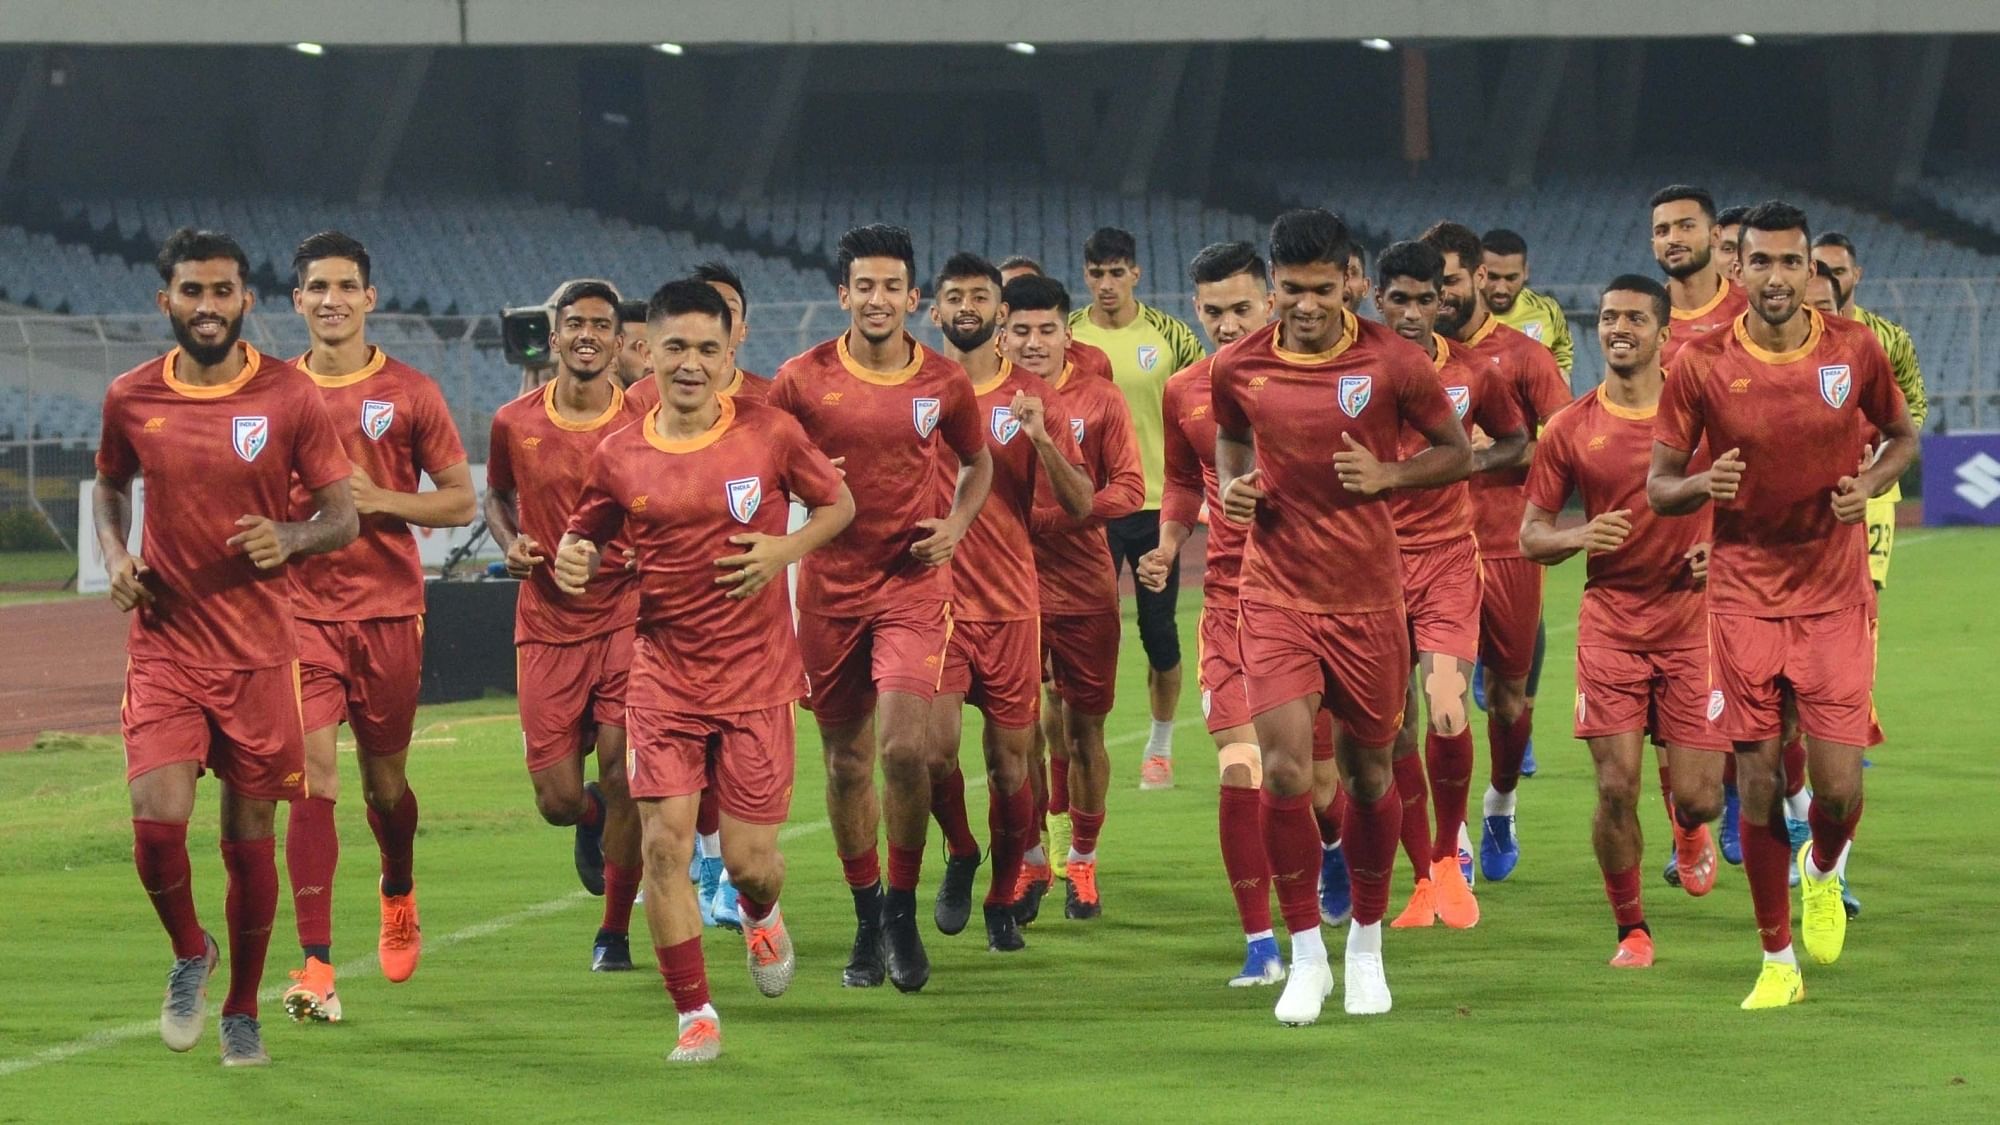 India vs Afghanistan Football Live Score Streaming: The Indian men’s football team will be looking to get three points against Afghanistan.